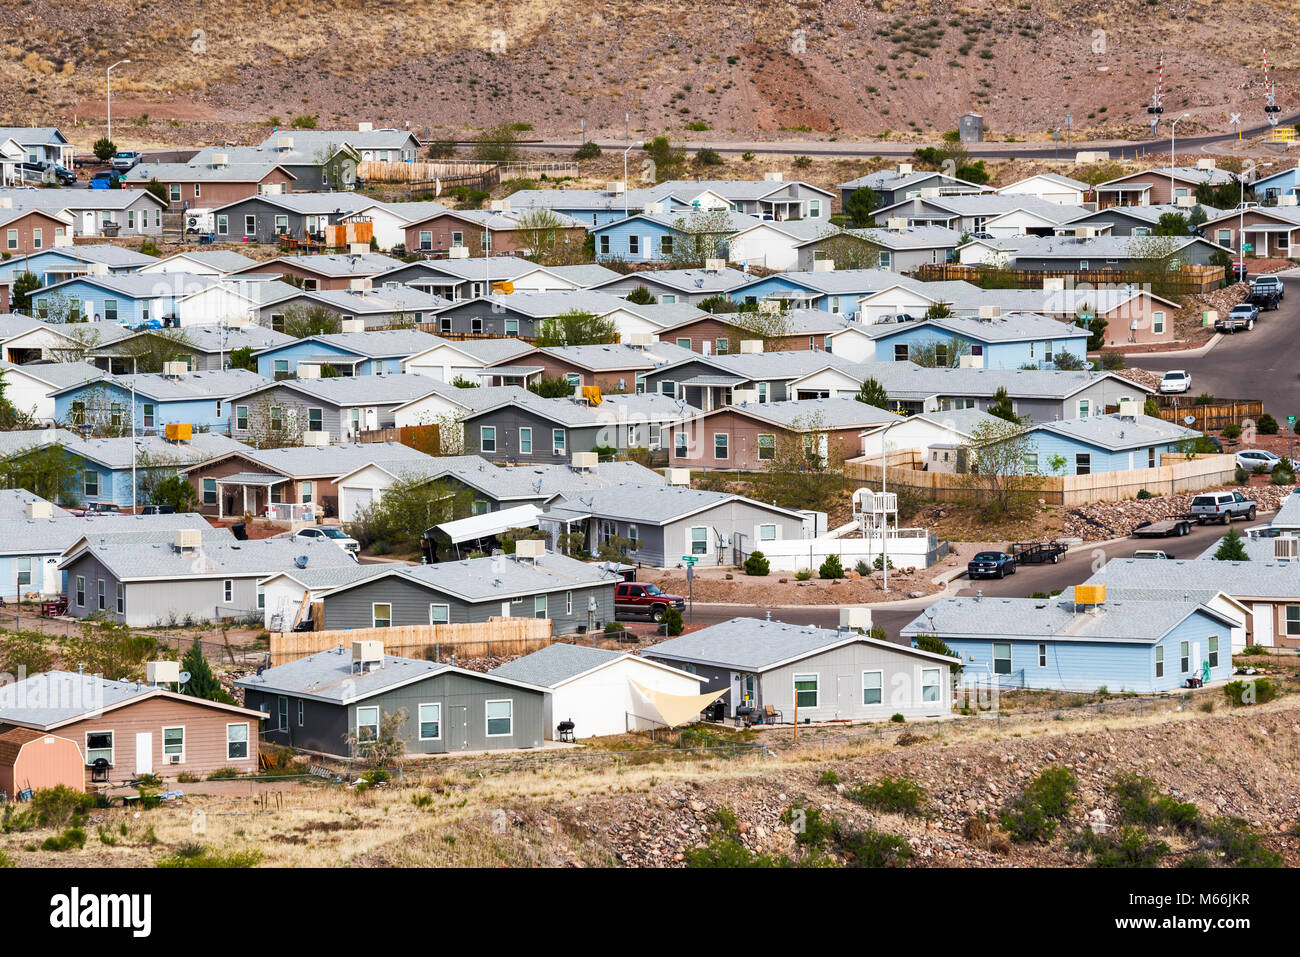 Single family houses in residential area in company town of Morenci, Arizona, USA Stock Photo